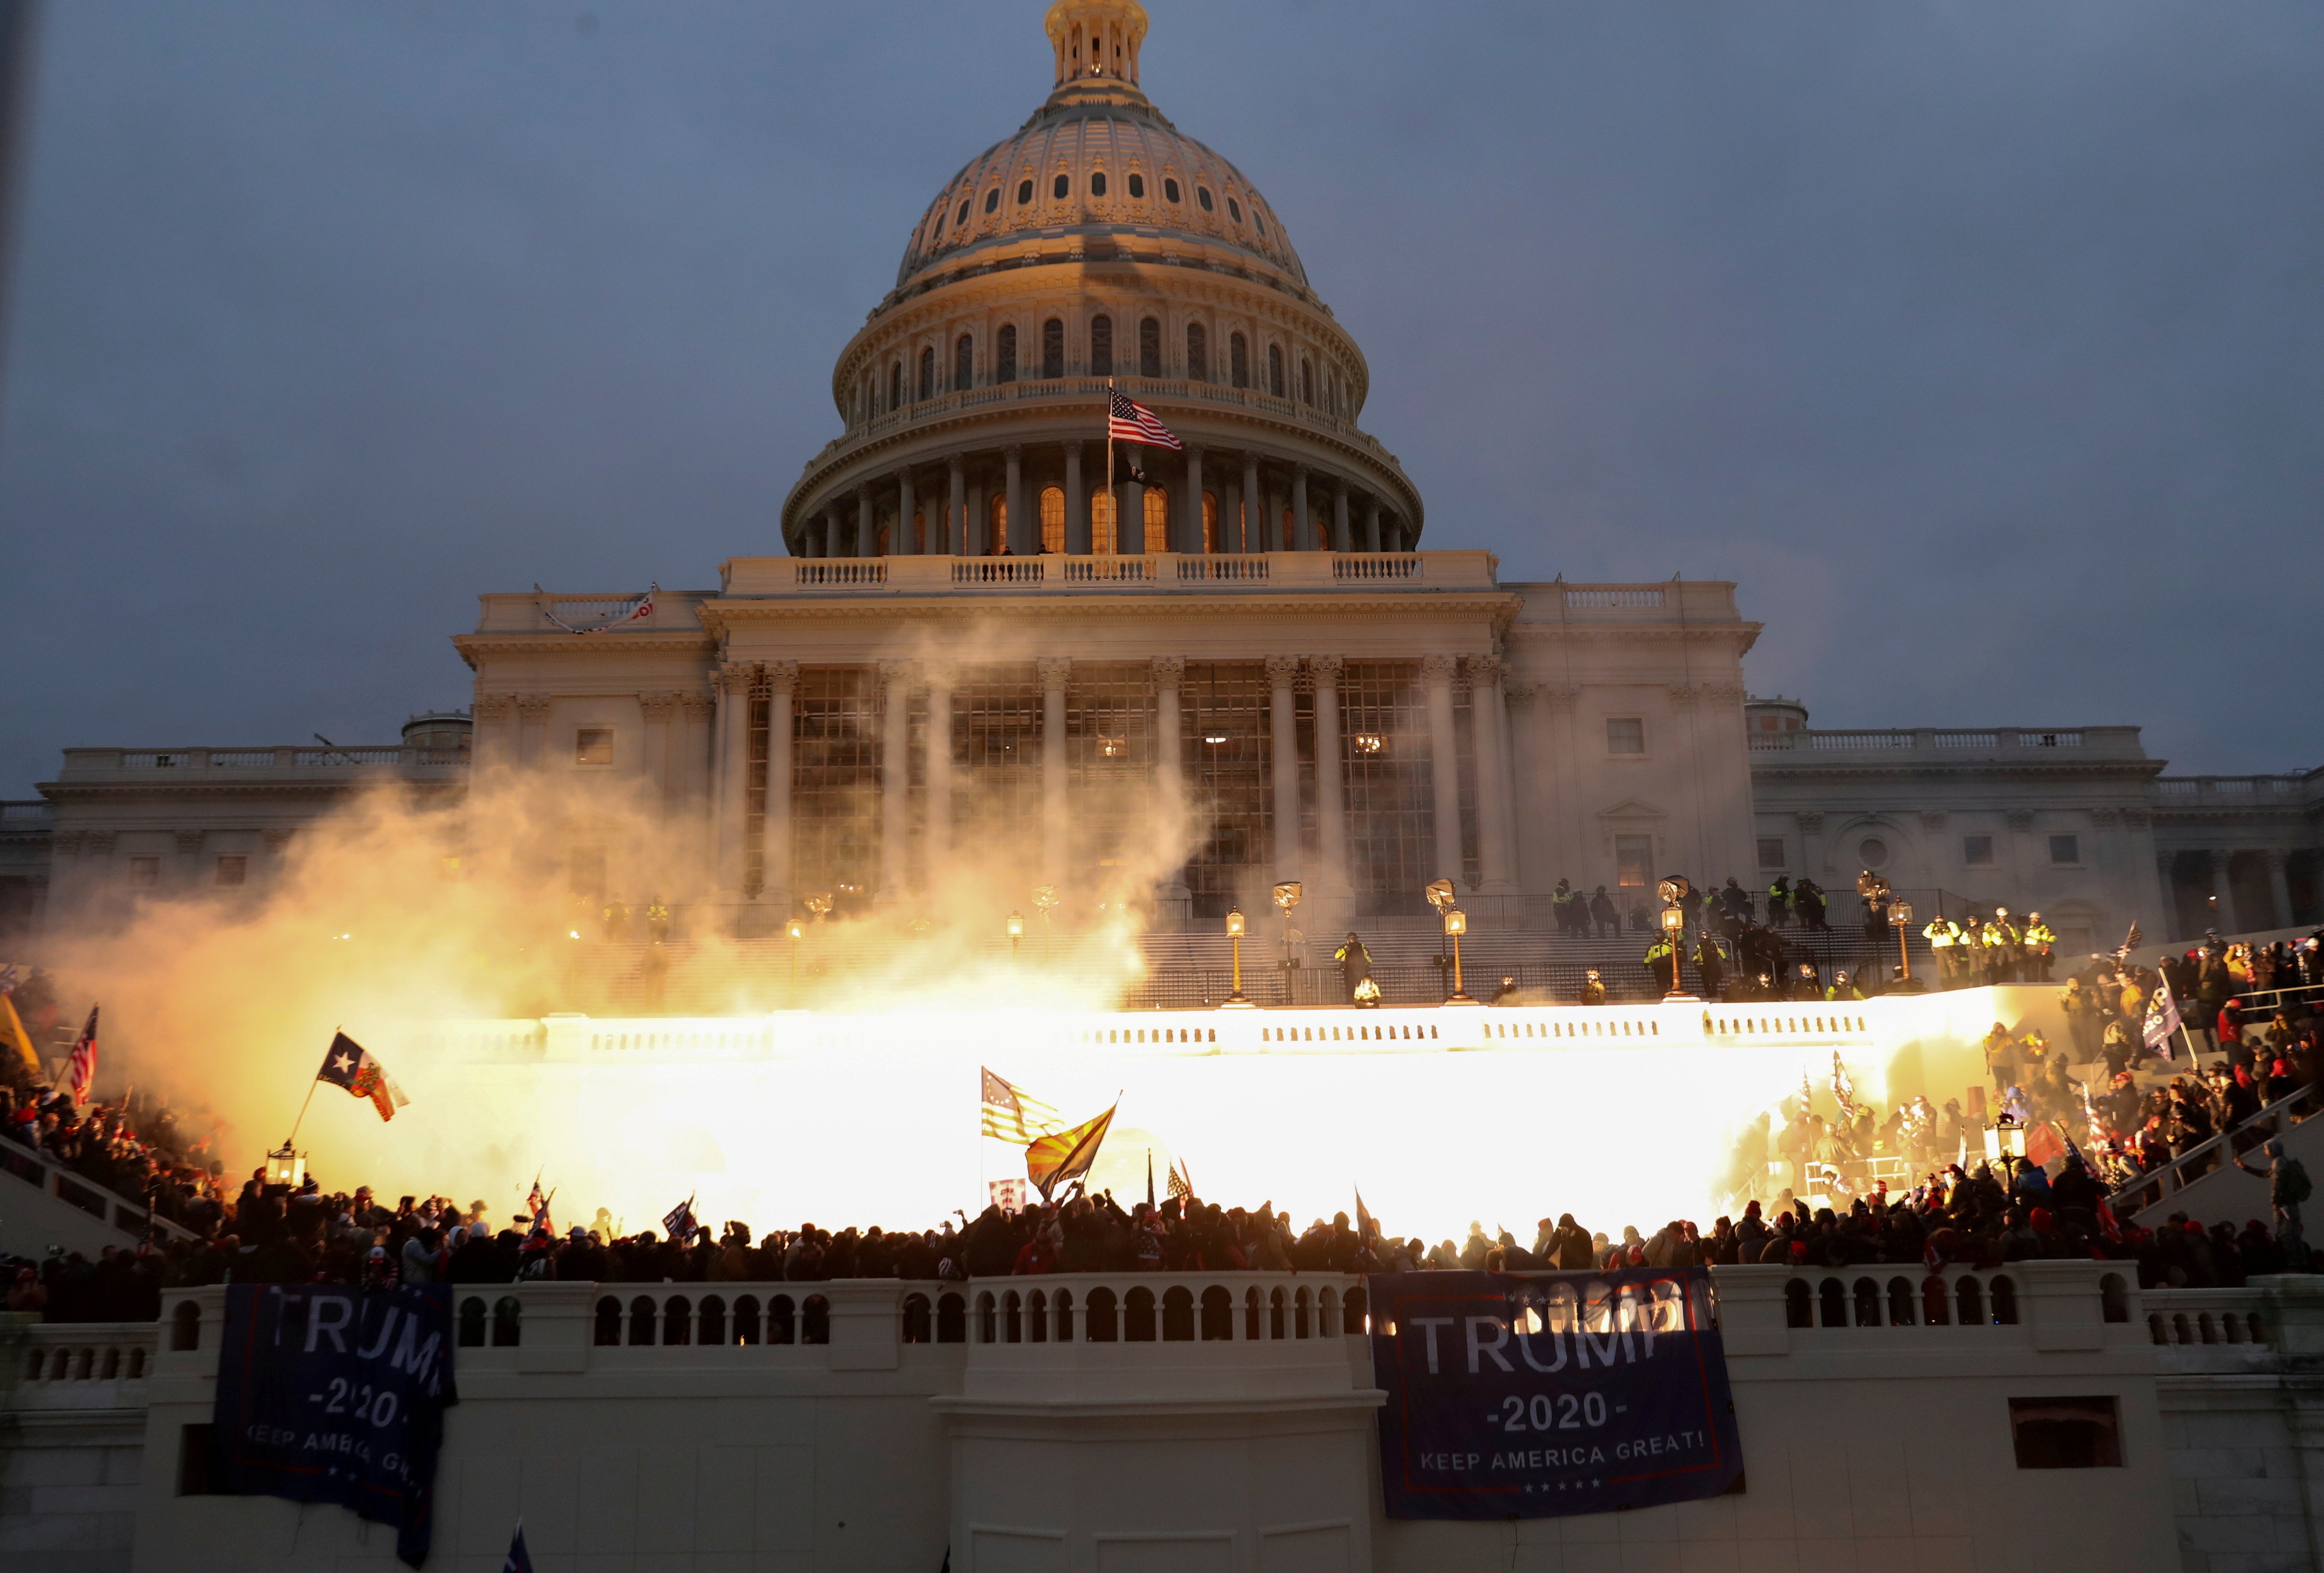 A photo captures an explosion caused by a police munition in front of the US Capitol building on 6 January